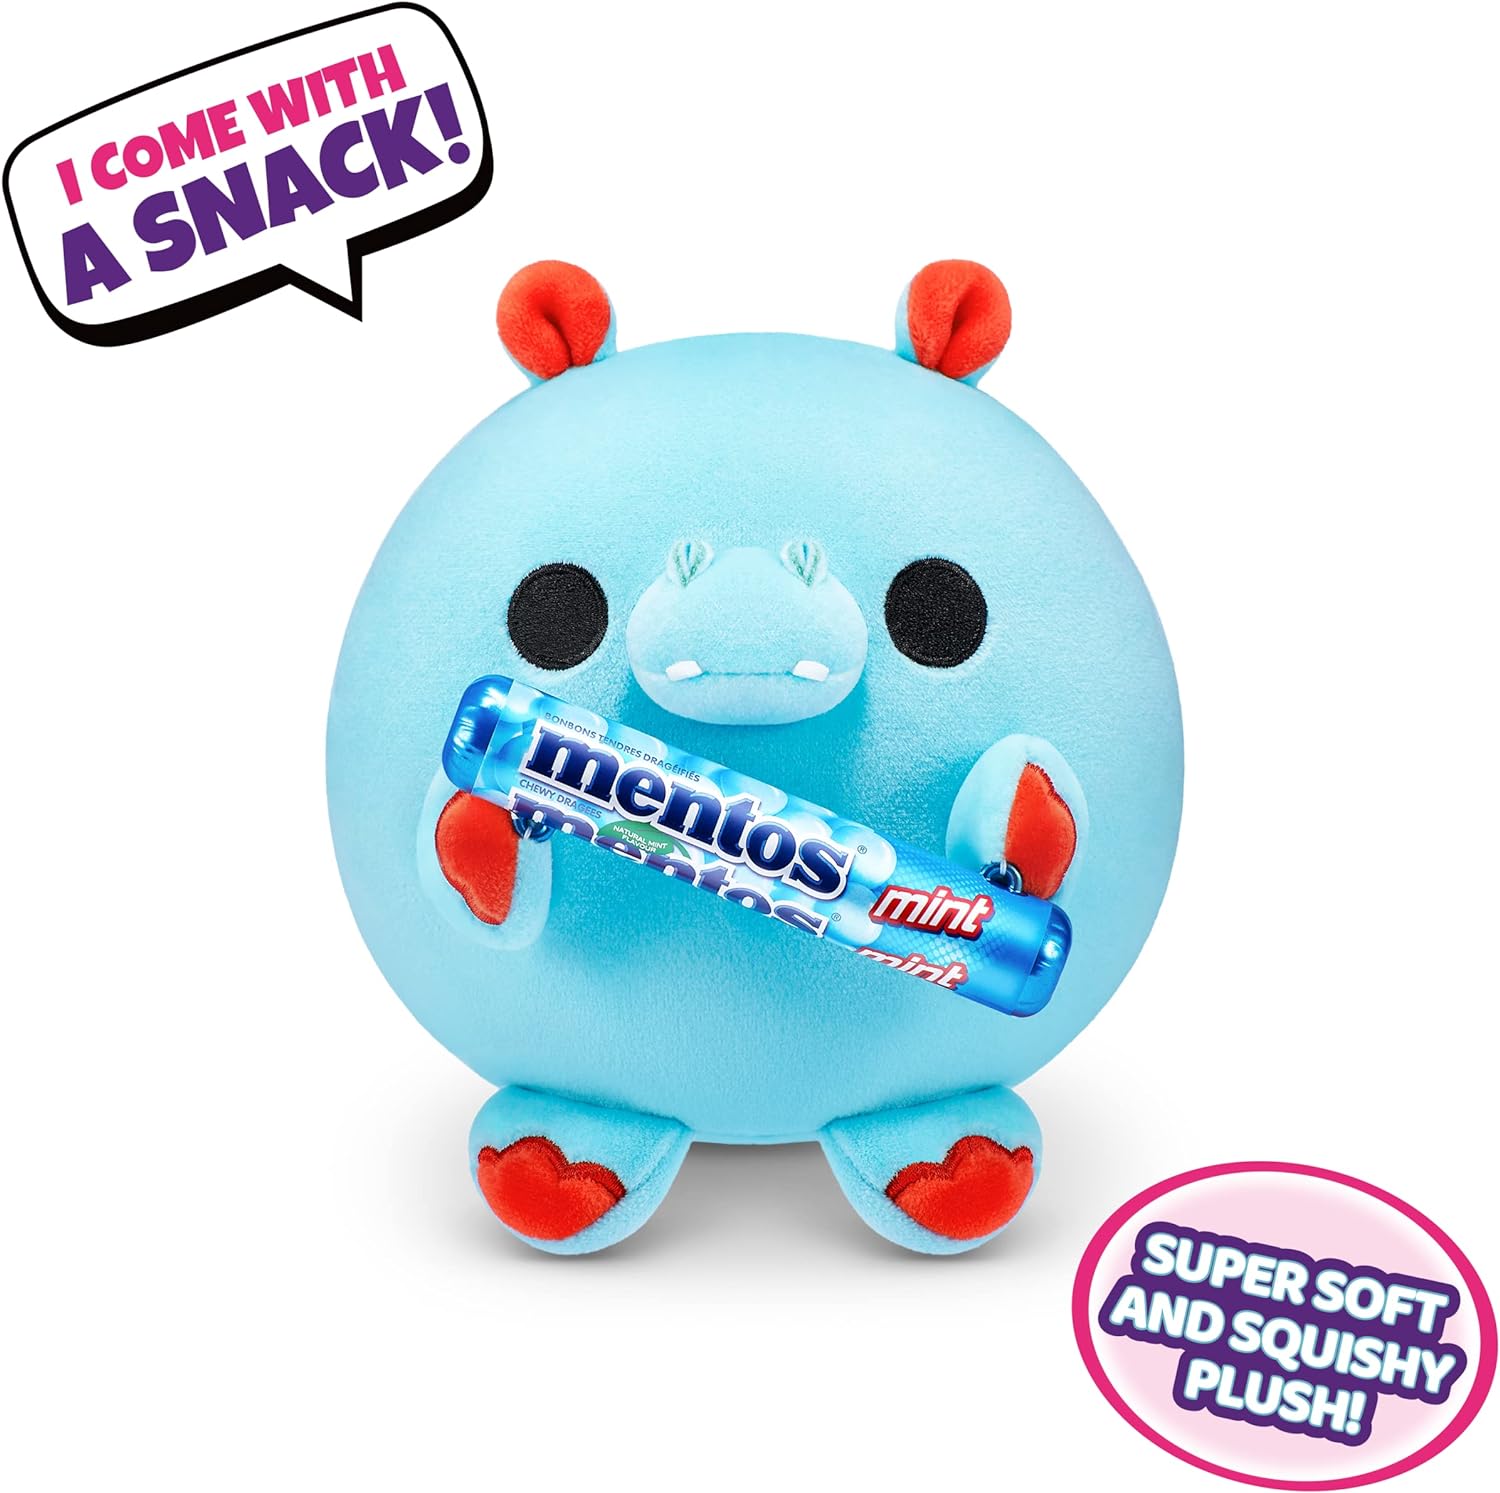 Snackles Small Sized 5.5 inch Snackle Plush by ZURU (Random Surprise), Cuddly Squishy Comfort 5.5 inch Plush with License Snack Brand Accessory